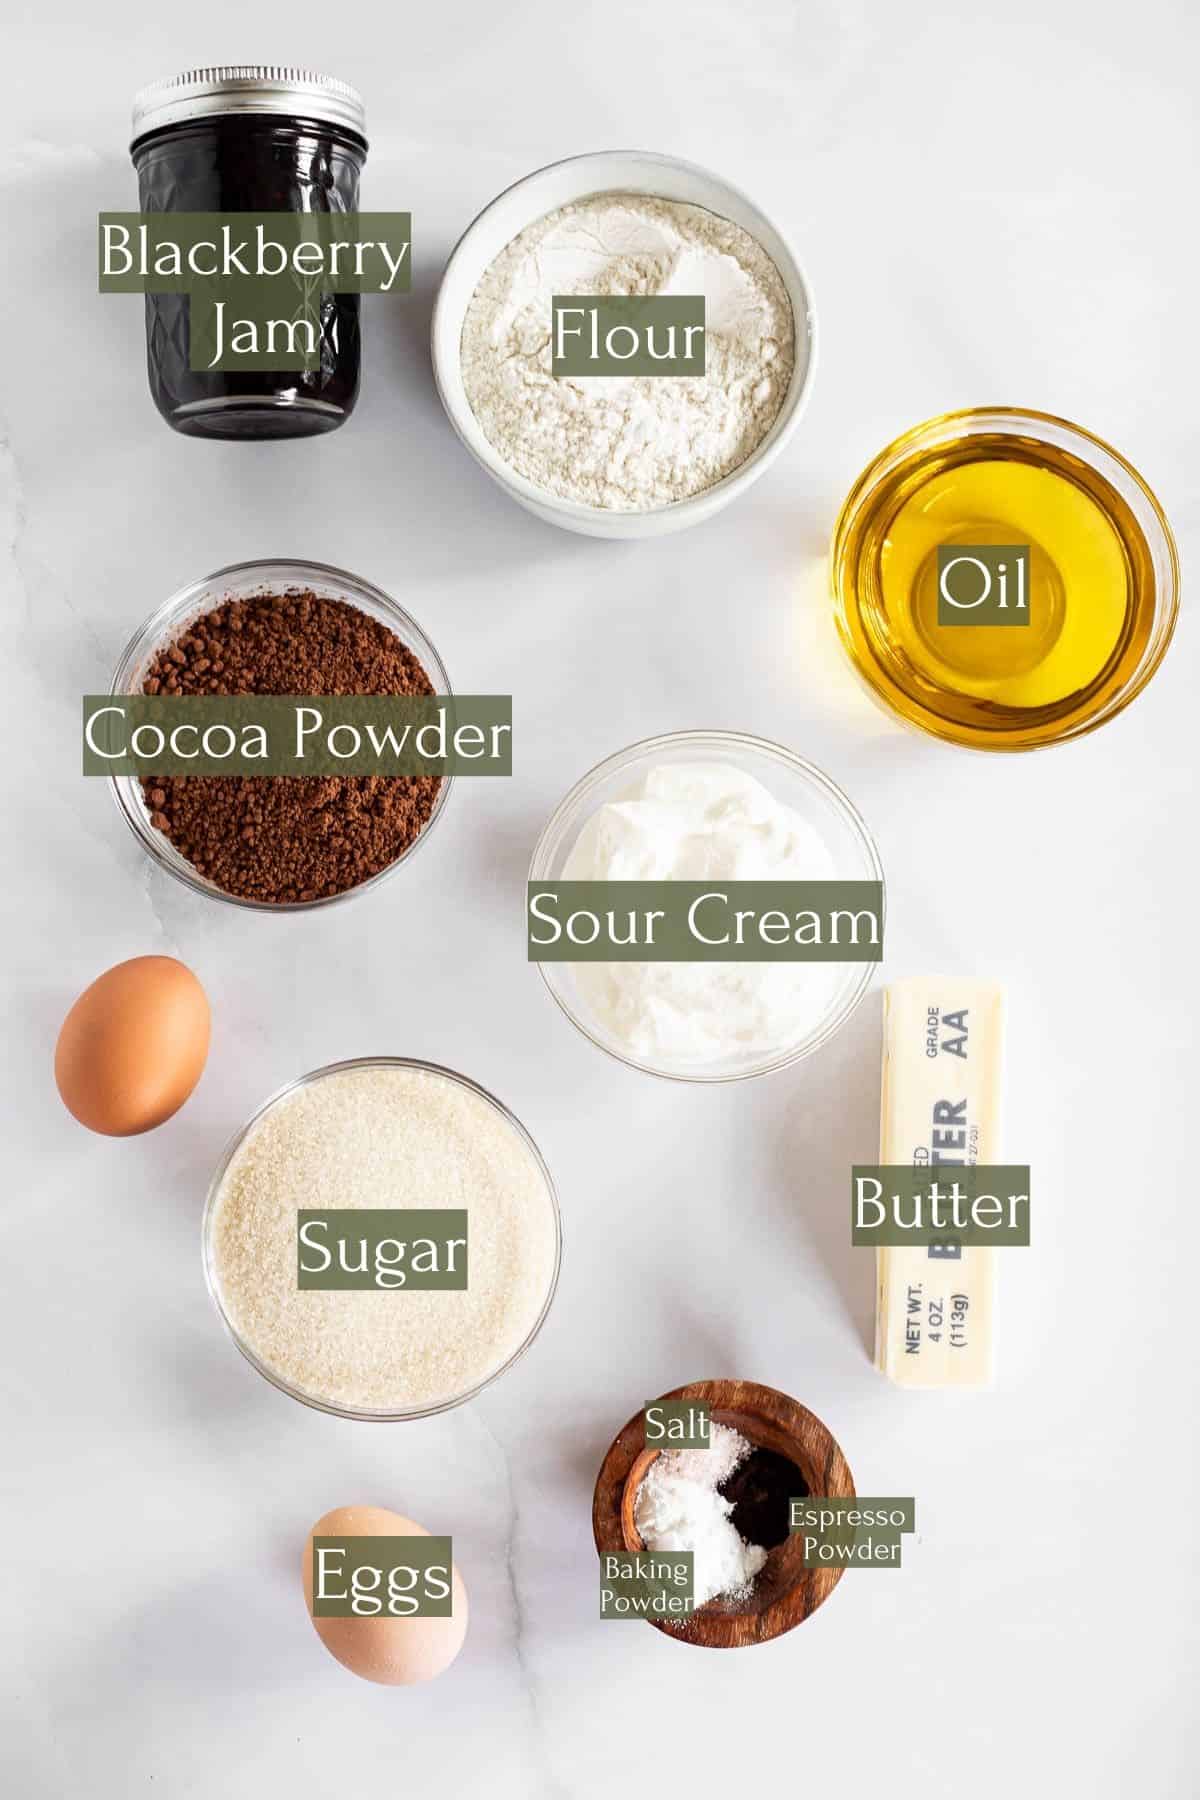 ingredients to make chocolate cupcakes with blackberries labeled with green text boxes.